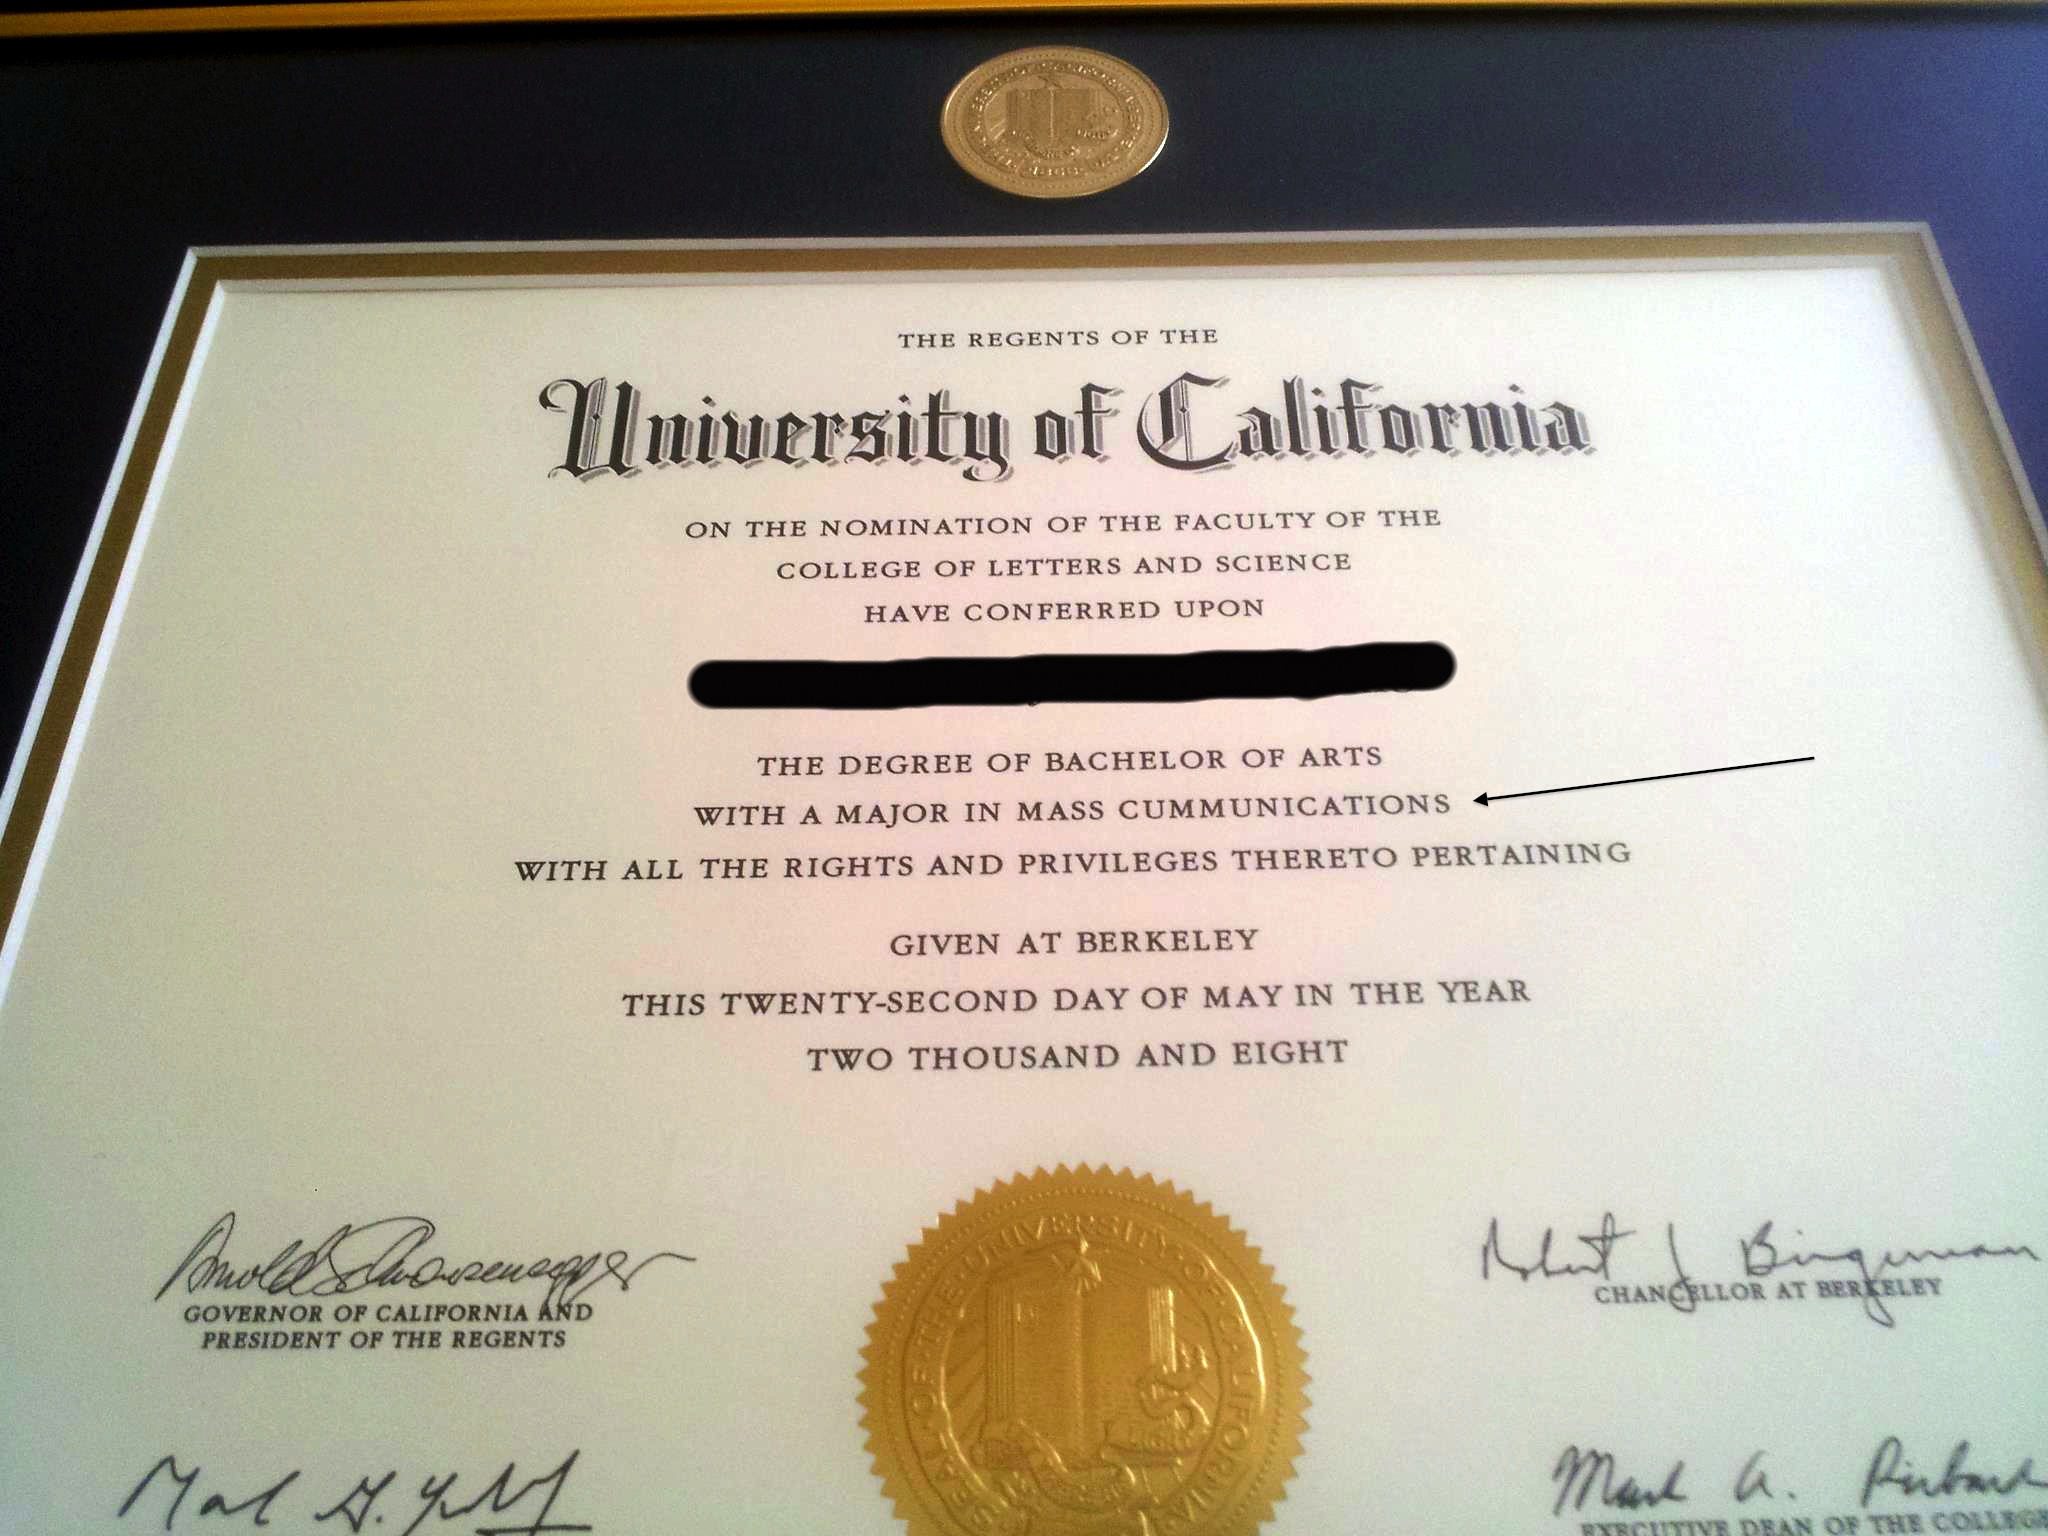 This diploma hung on his wall for years before he noticed this horrible typo.